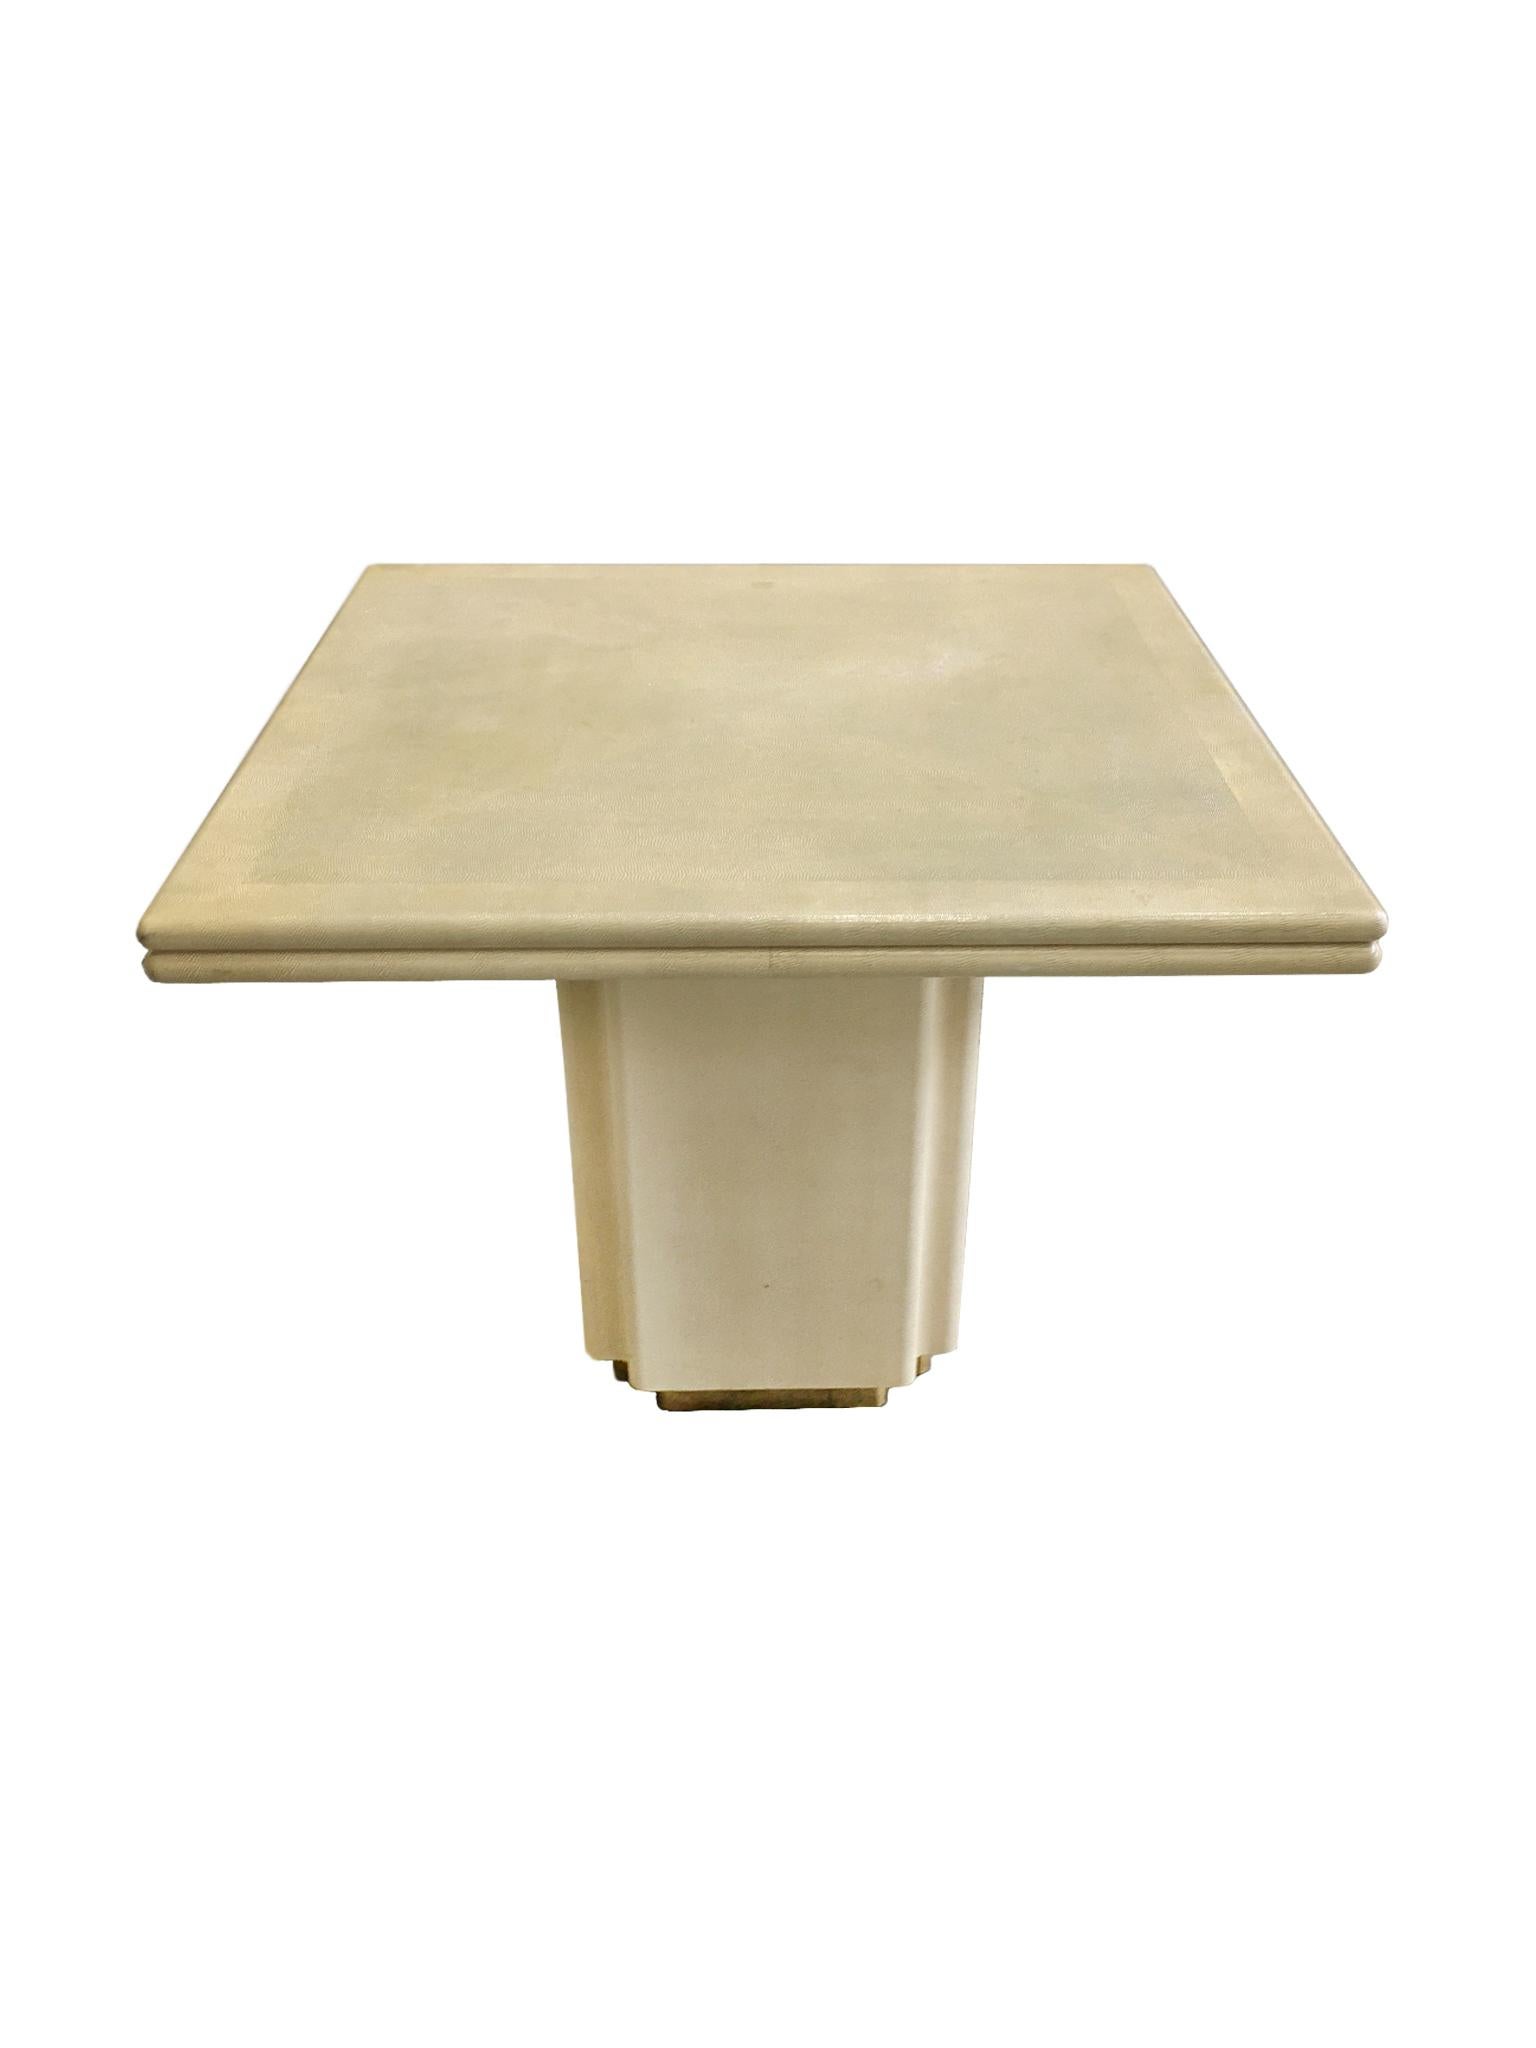 A game table in the style of Karl Springer, made in the 1970s. In the spirit of Springer's luxe designs, the table draws inspiration from Art Deco, combining simplicity and lavishness. The table is wrapped in a pale cream yellow snakeskin.